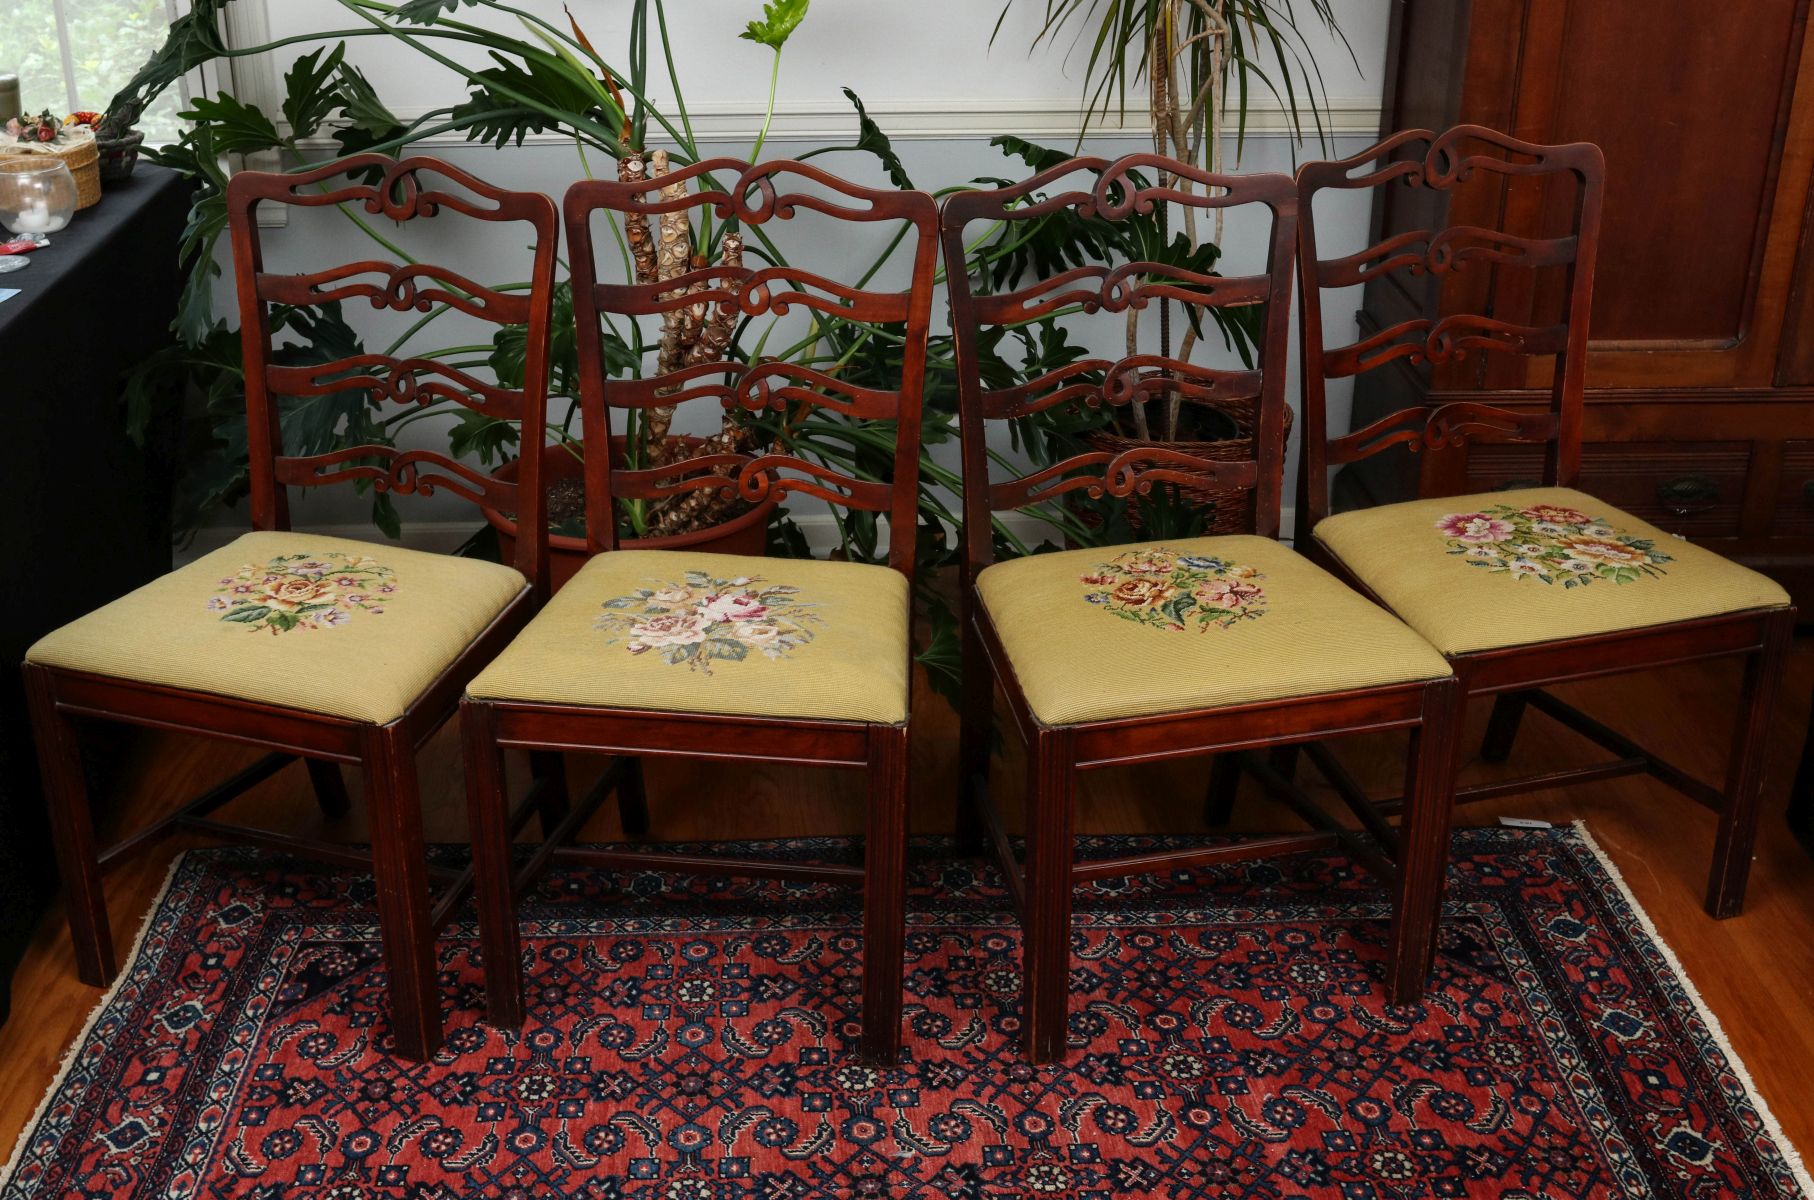 FOUR 20TH C. CHIPPENDALE STYLE NEEDLEPOINT CHAIRS